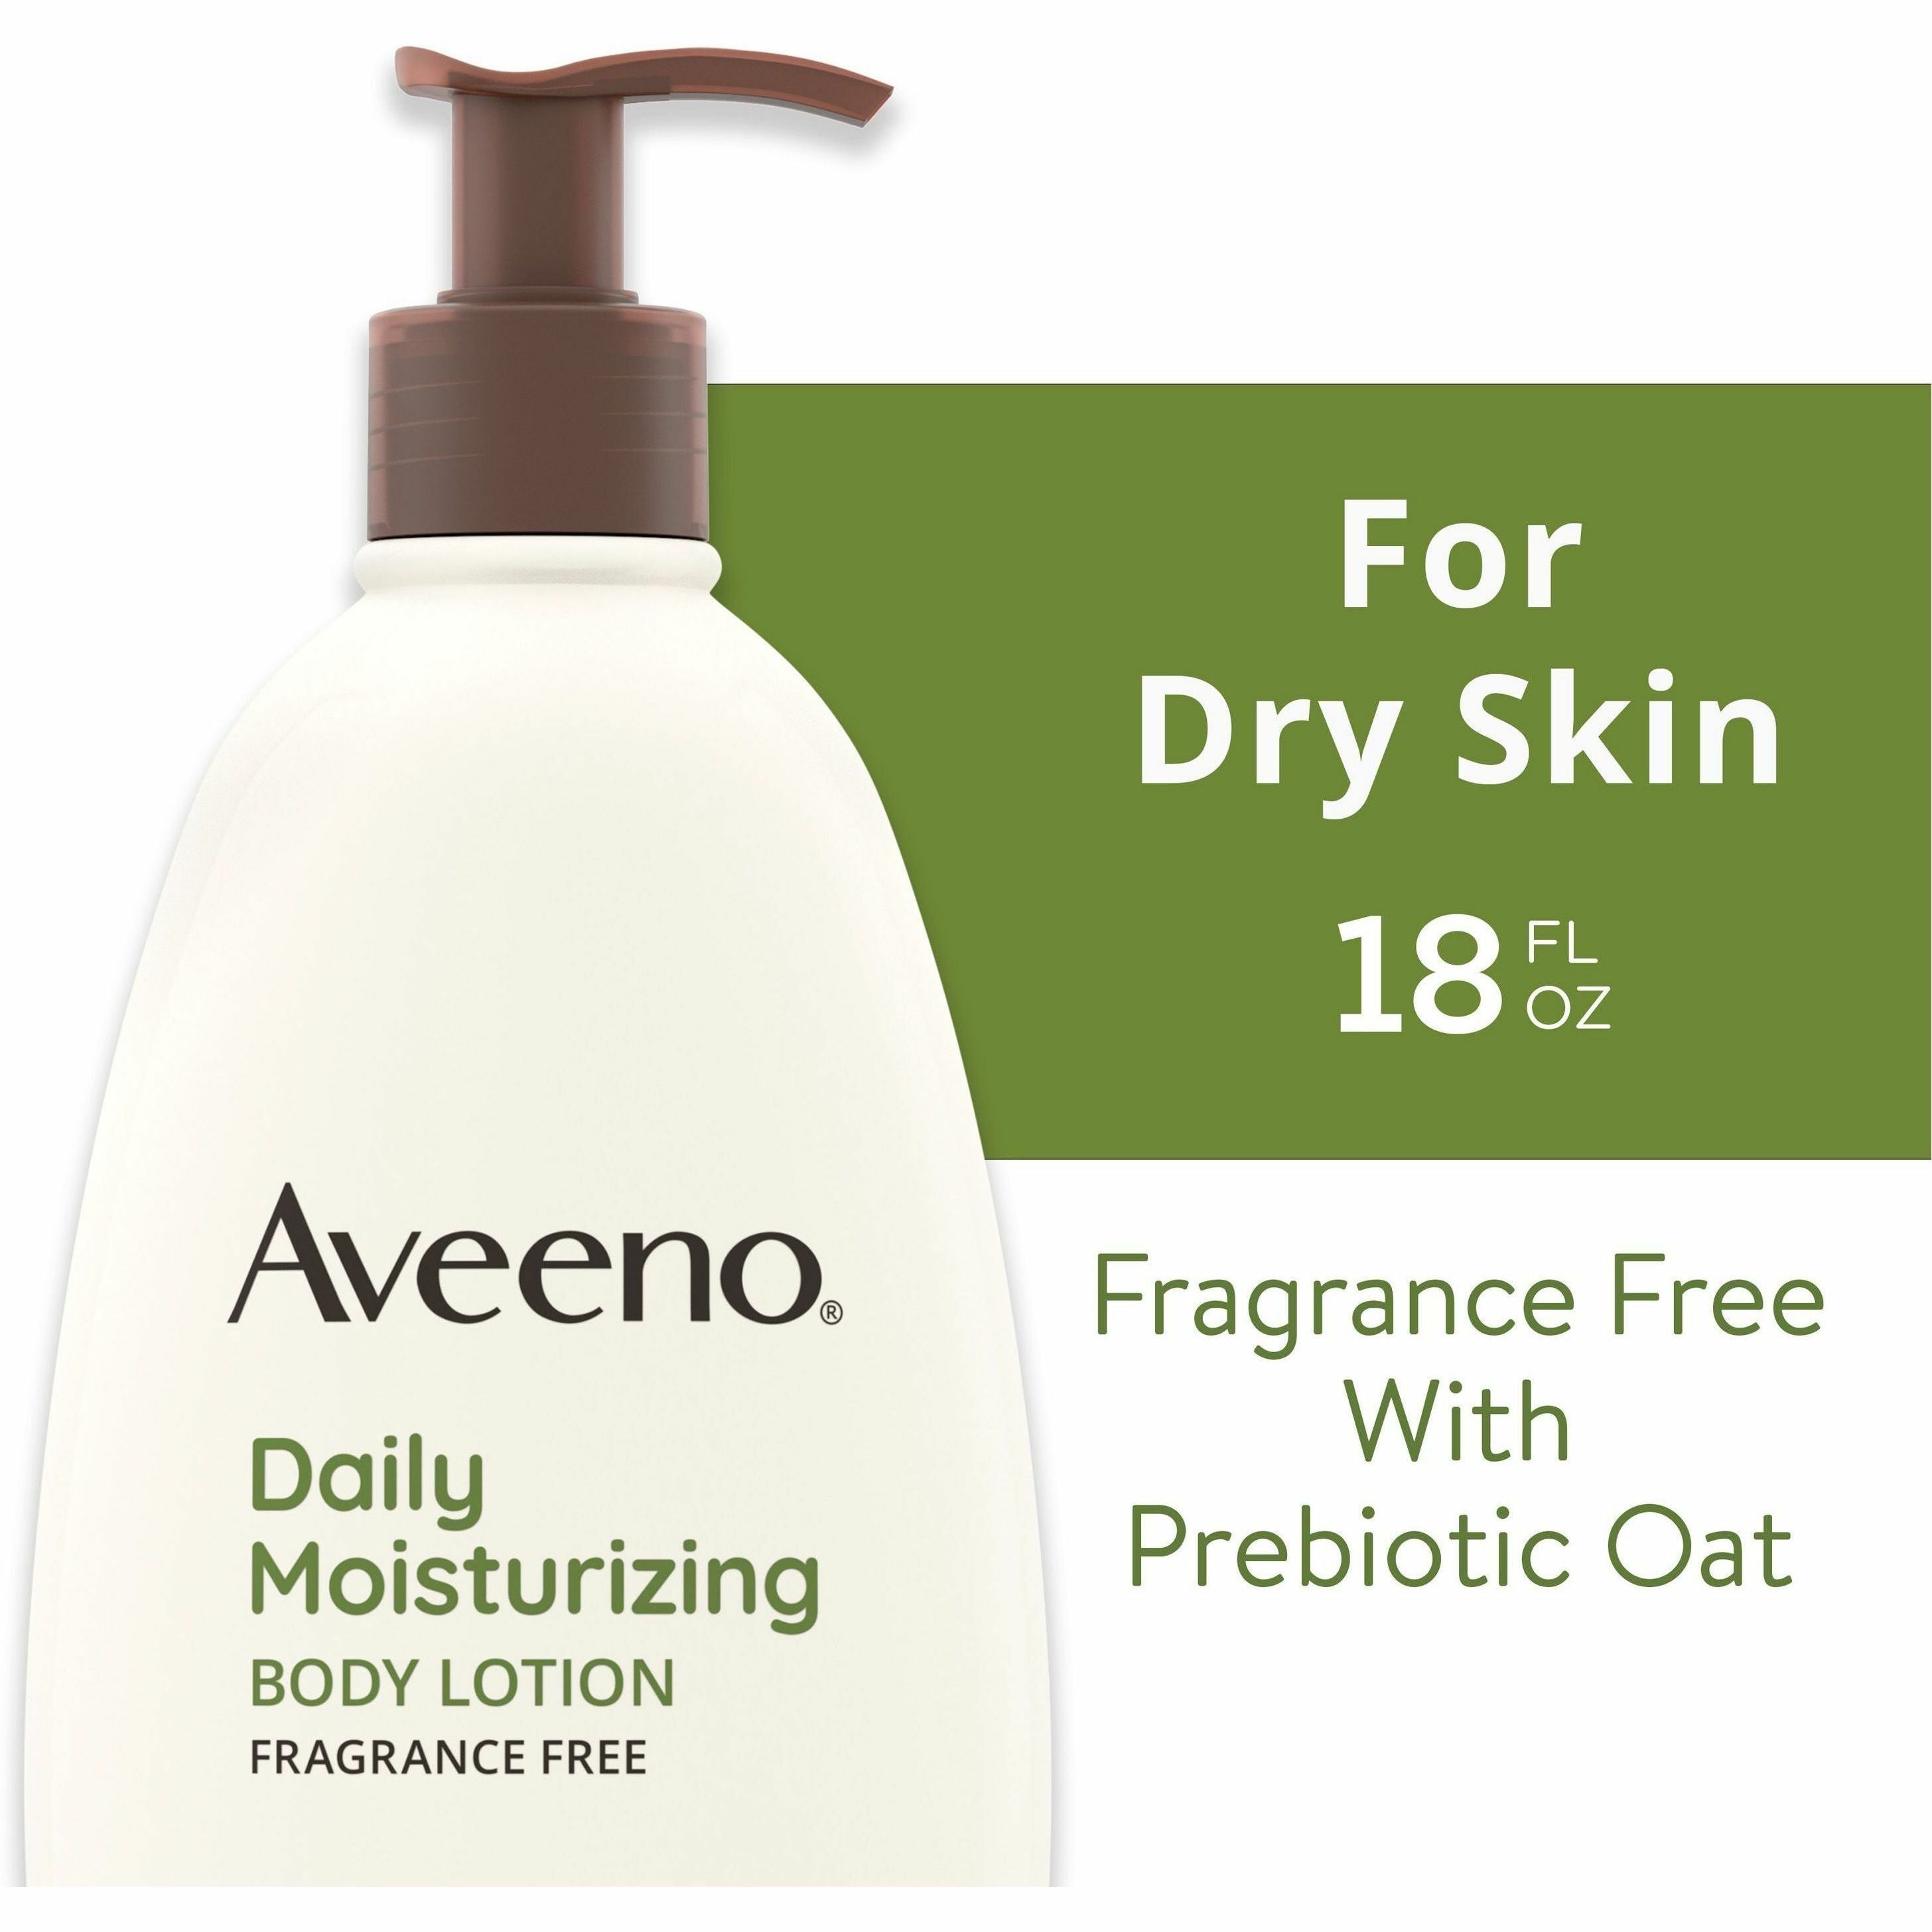 aveeno-daily-moisturizing-body-lotion-lotion-18-fl-oz-for-dry-skin-applicable-on-body-moisturising-fragrance-free-non-greasy-non-comedogenic-soothing-oat-rich-emollients-nourishes-dry-skin-gentle-1-each_joj003844 - 5